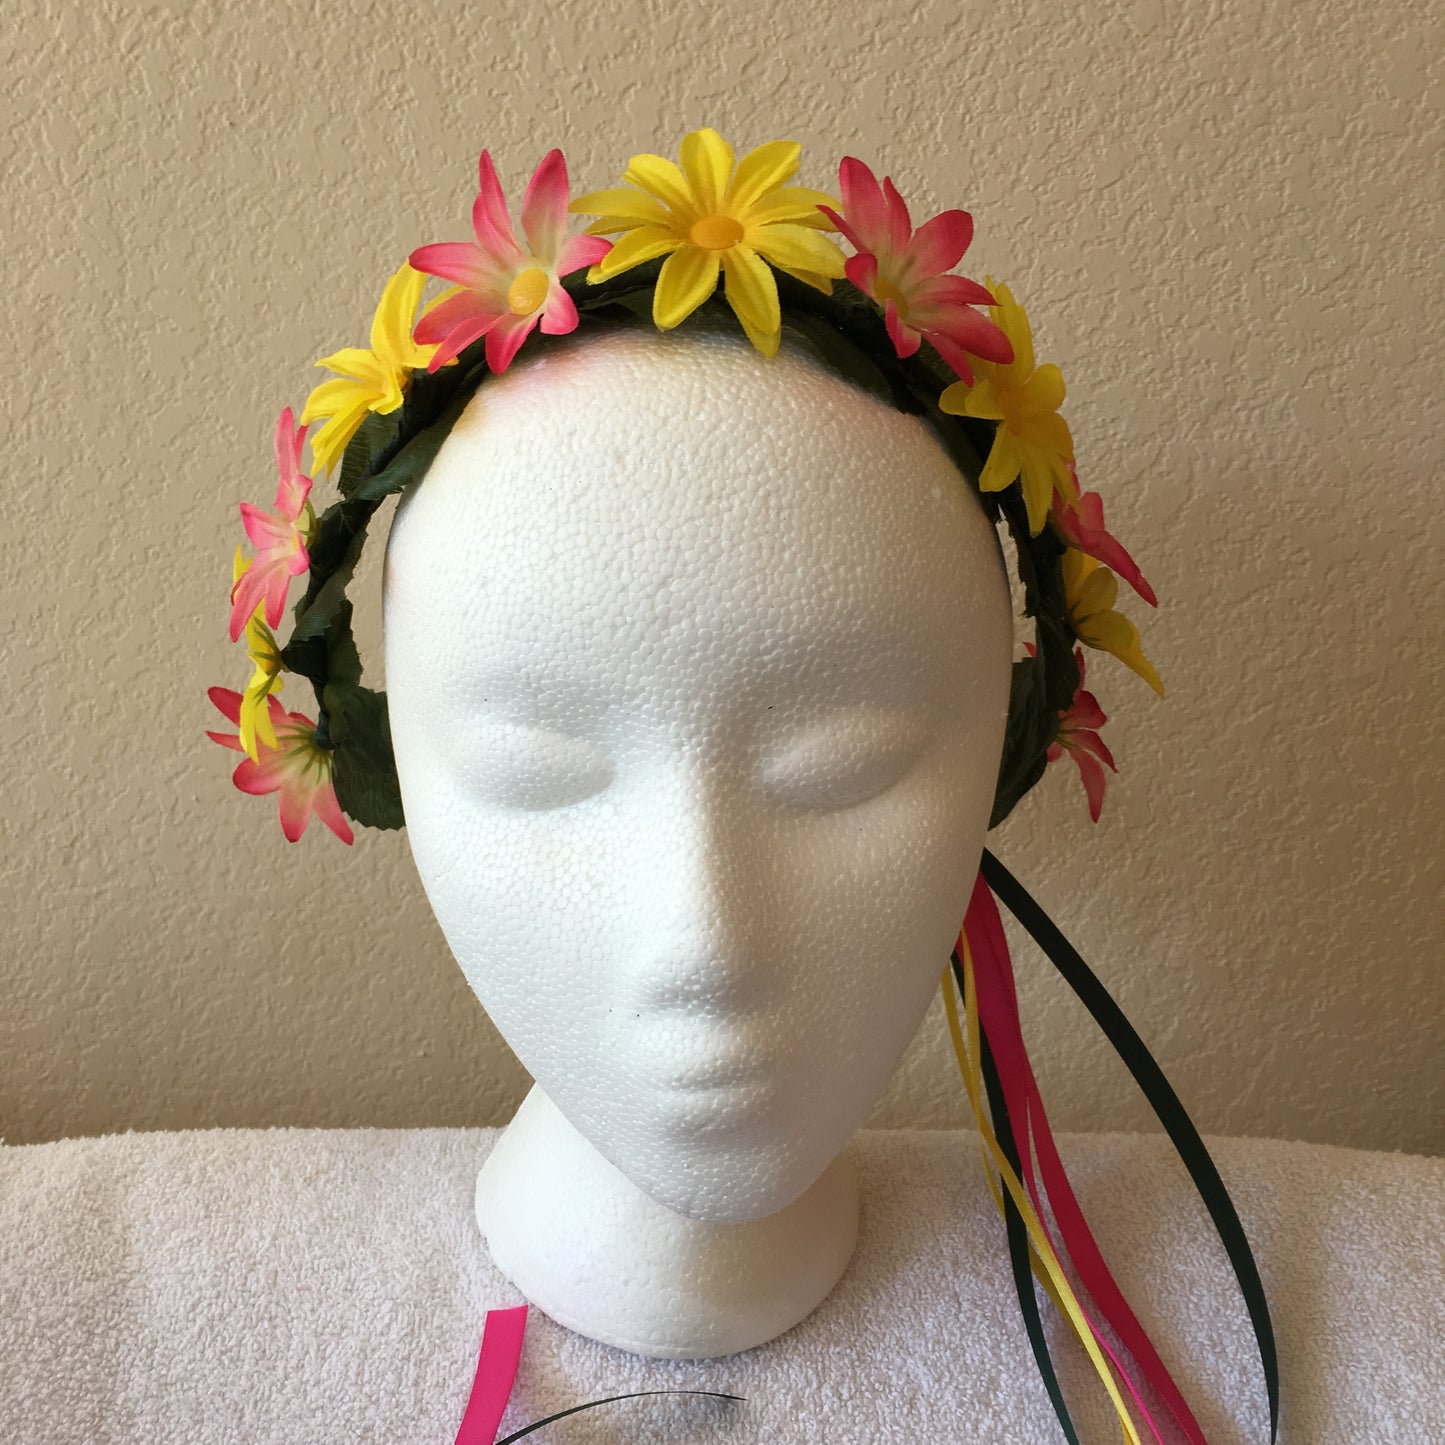 Small Wreath - All yellow daisies w/ pink to yellow daisies